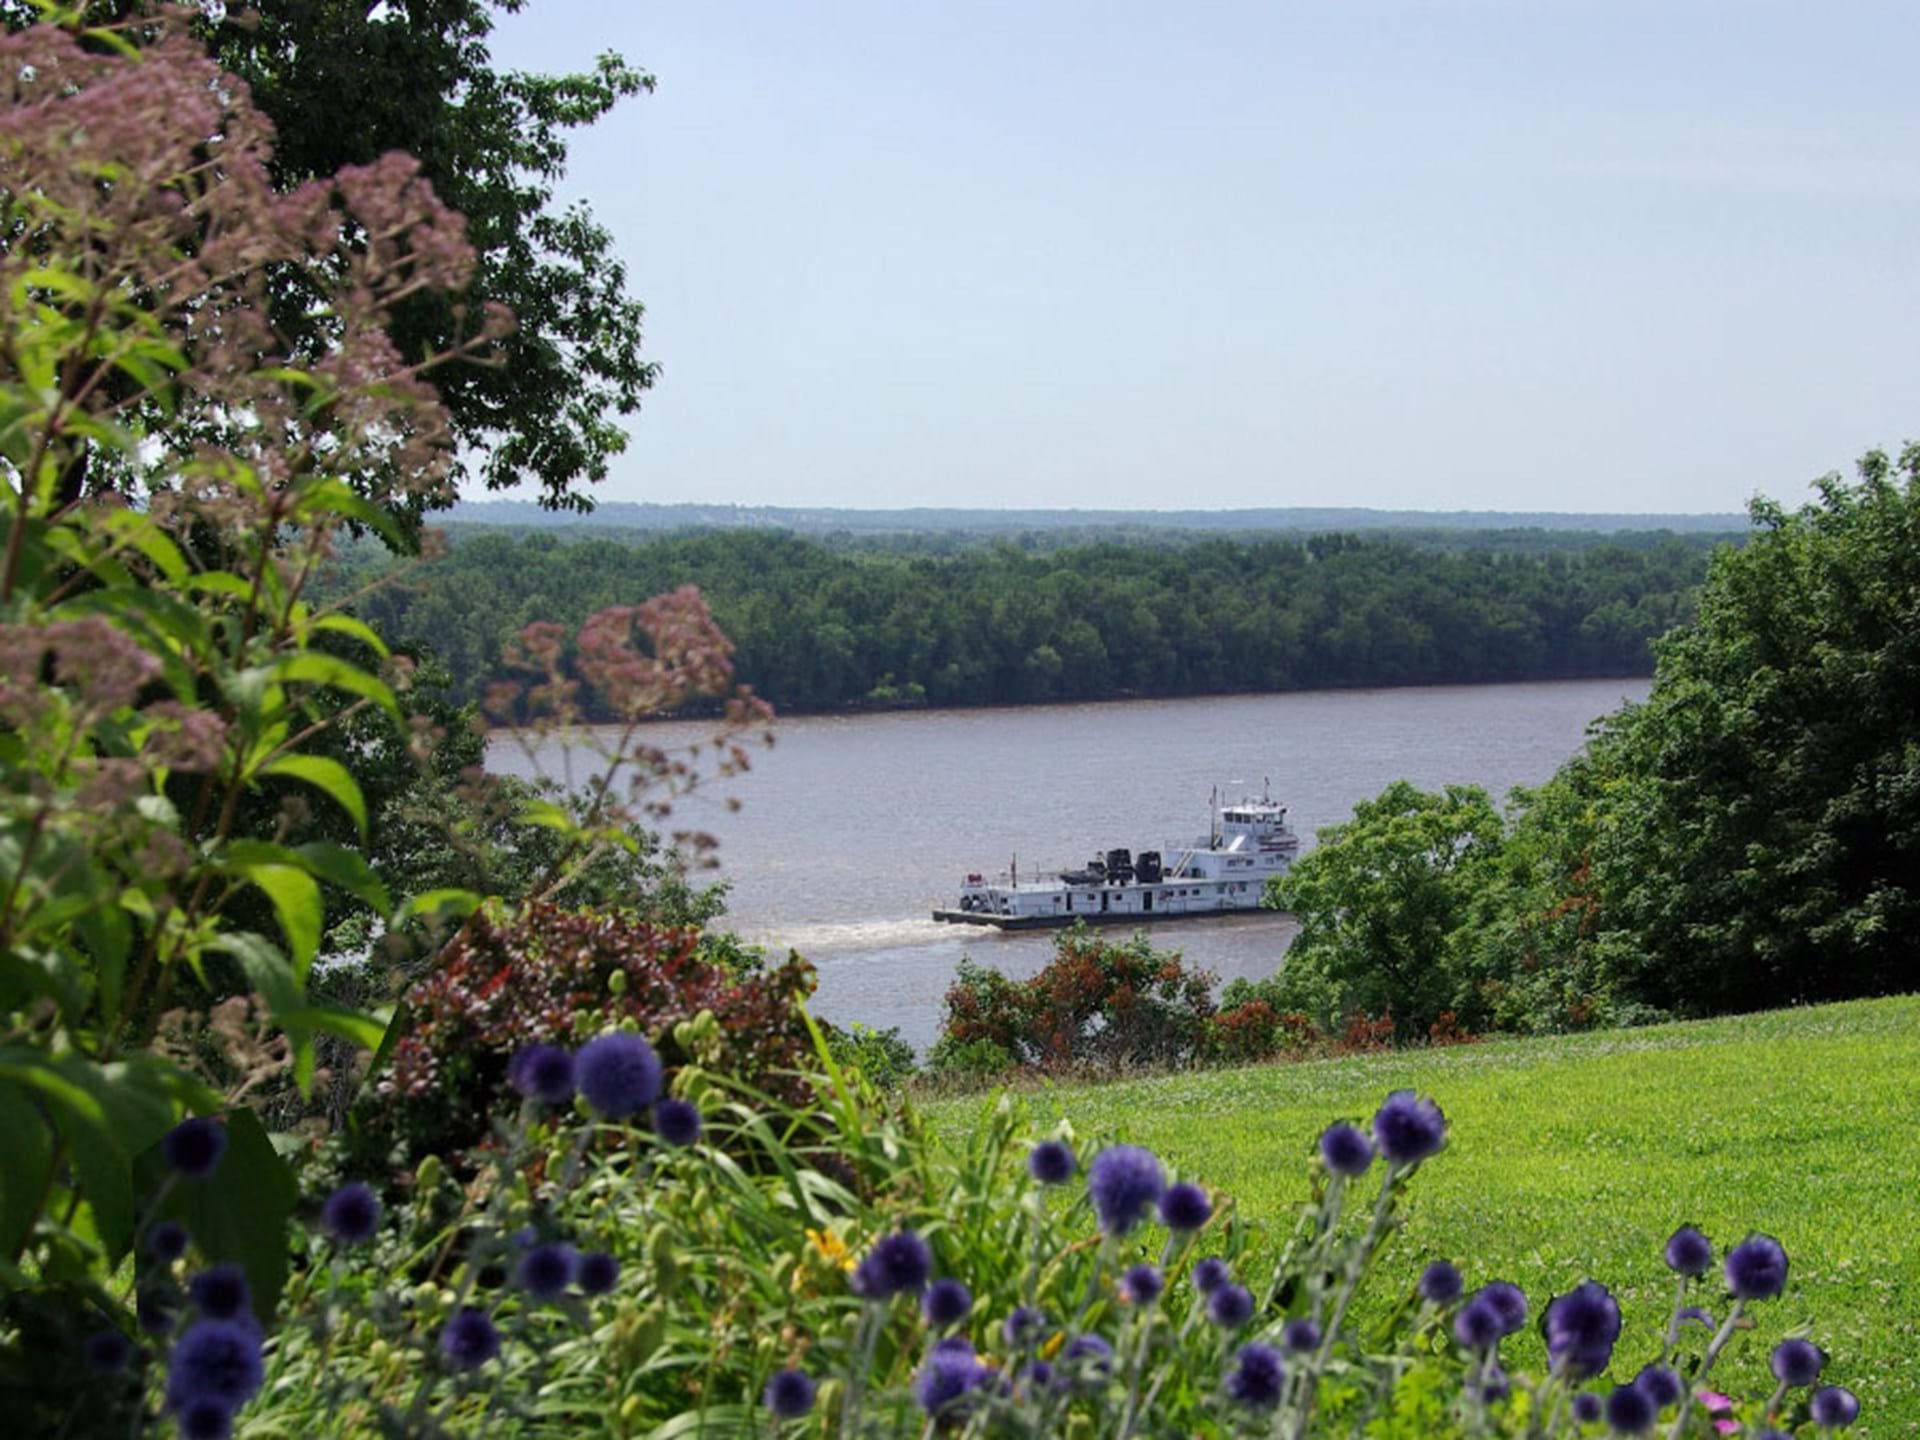 View of the Mississippi River from Crapo Park